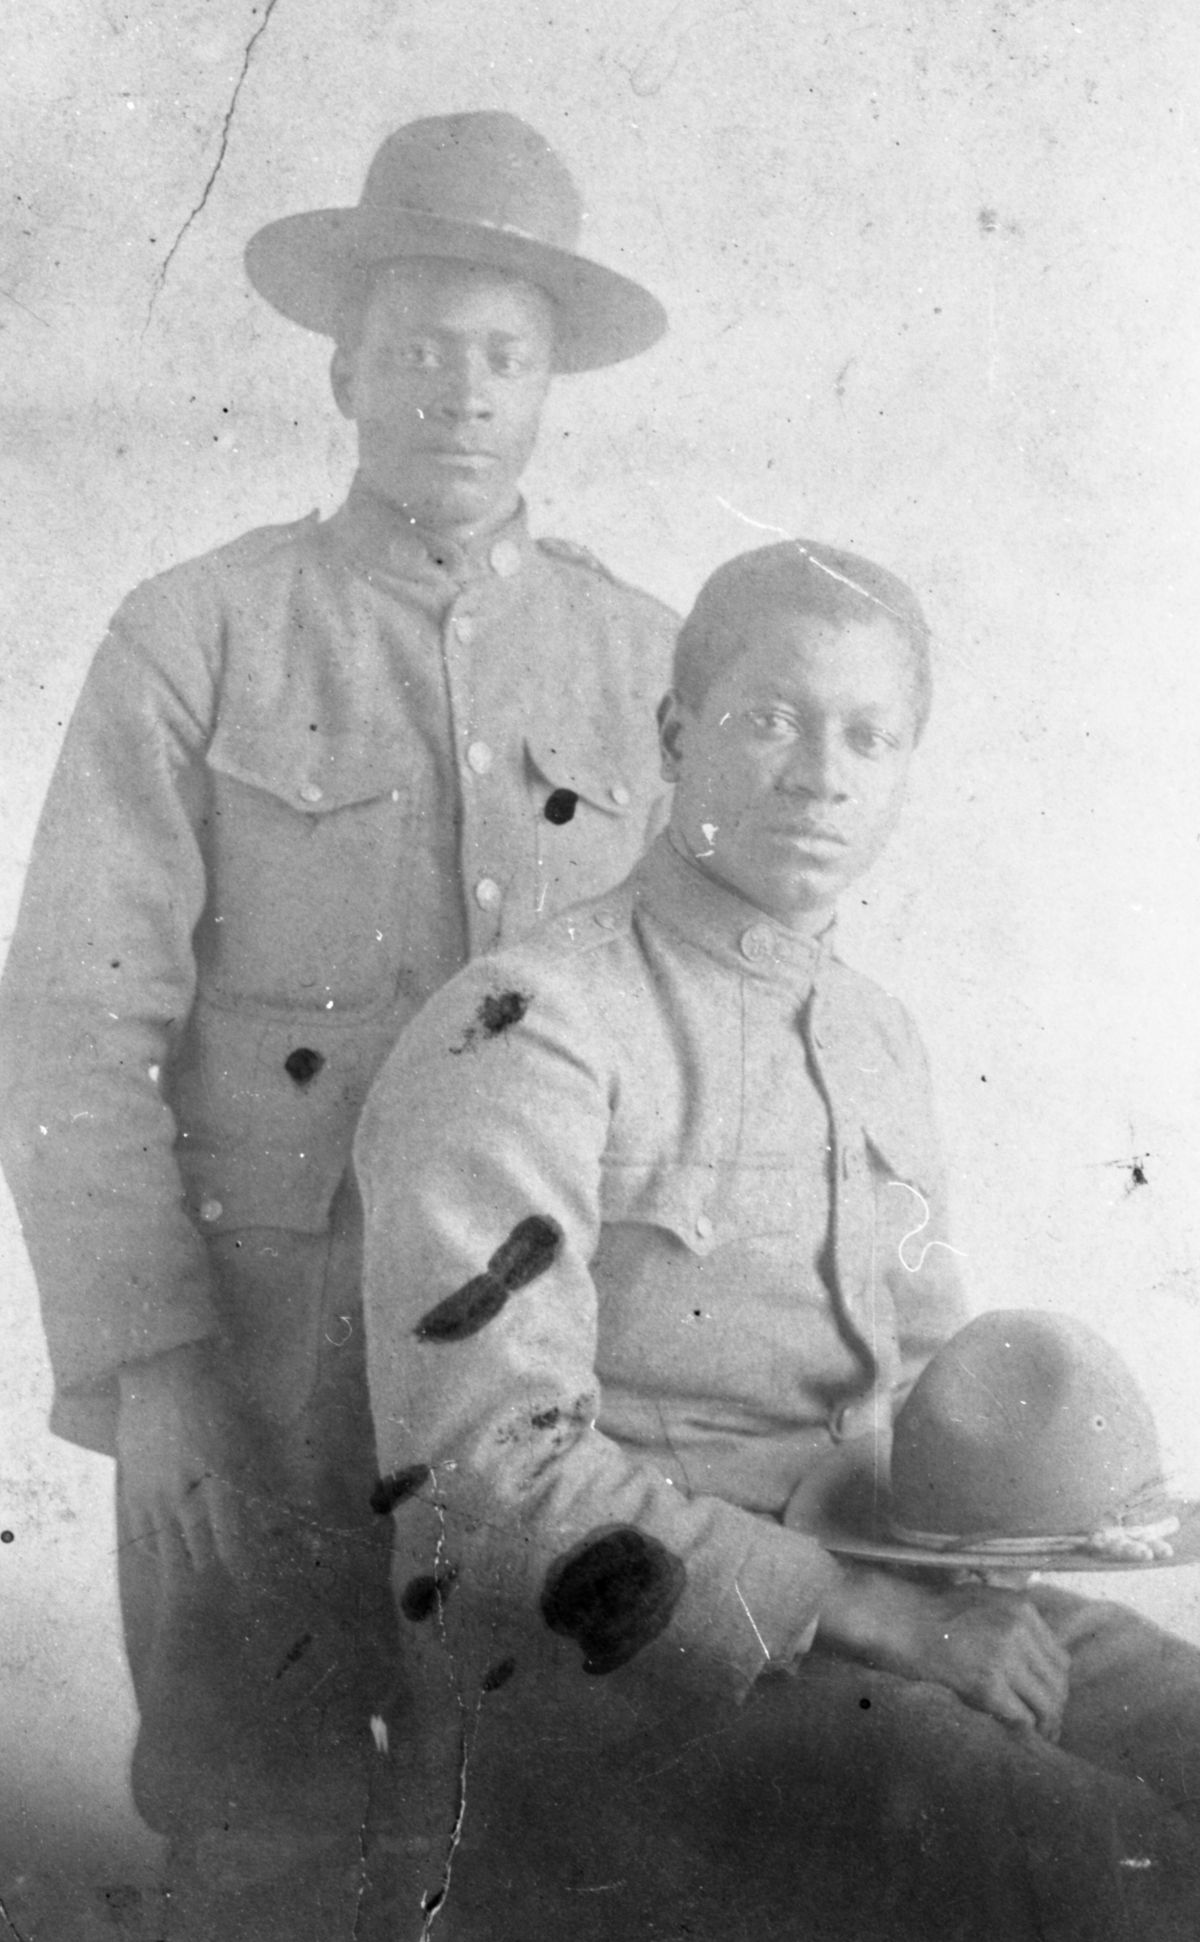 S. Augustus Aikens and friend in uniform - Cherry Lake, Florida